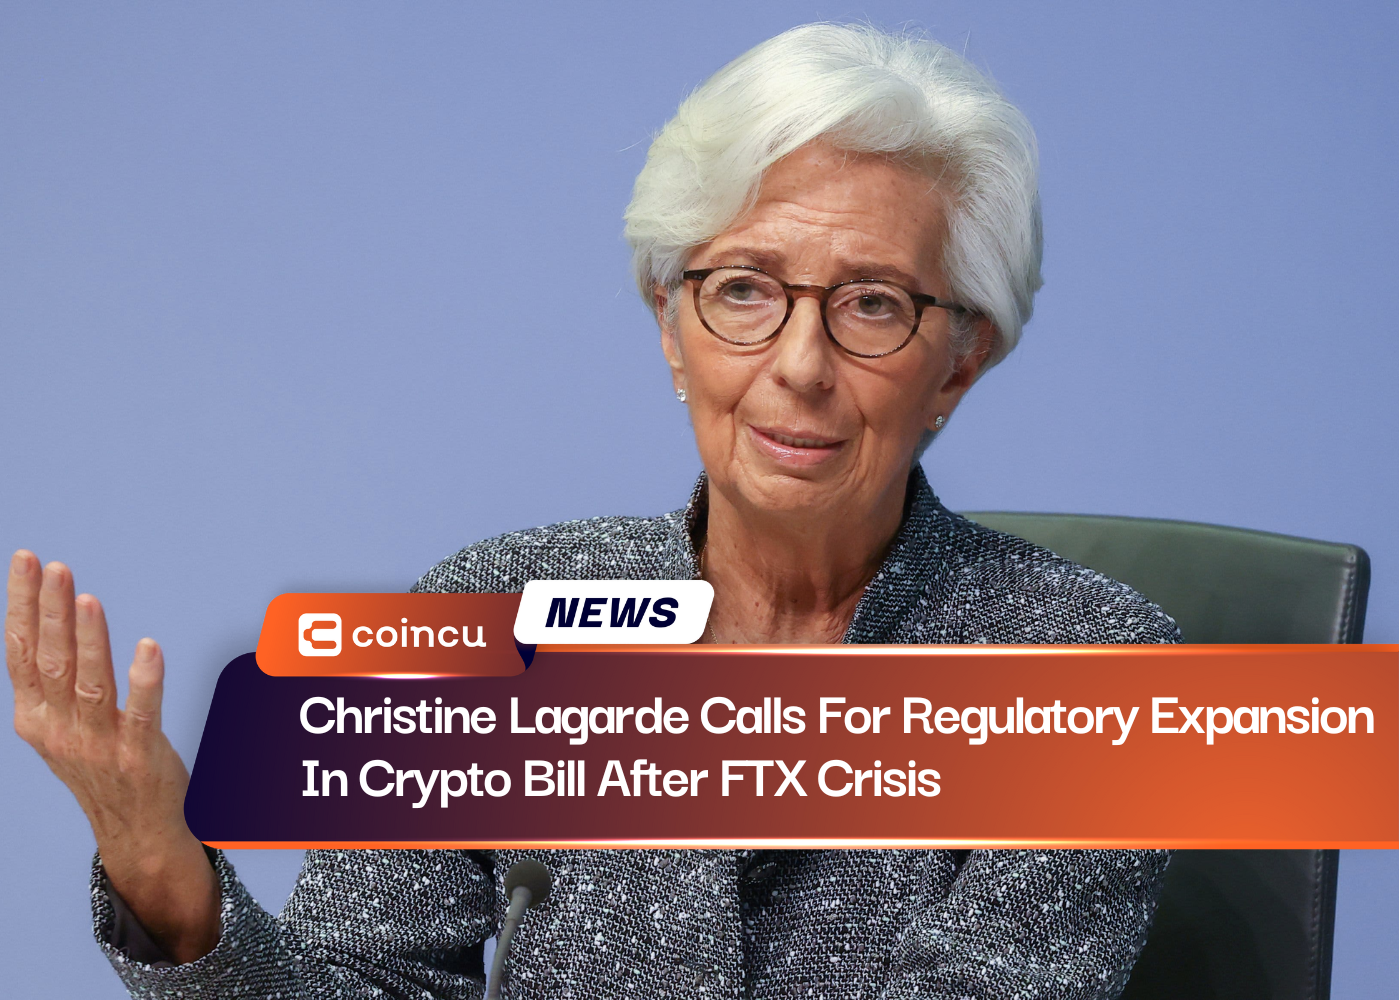 Christine Lagarde Calls For Regulatory Expansion In Crypto Bill After FTX Crisis